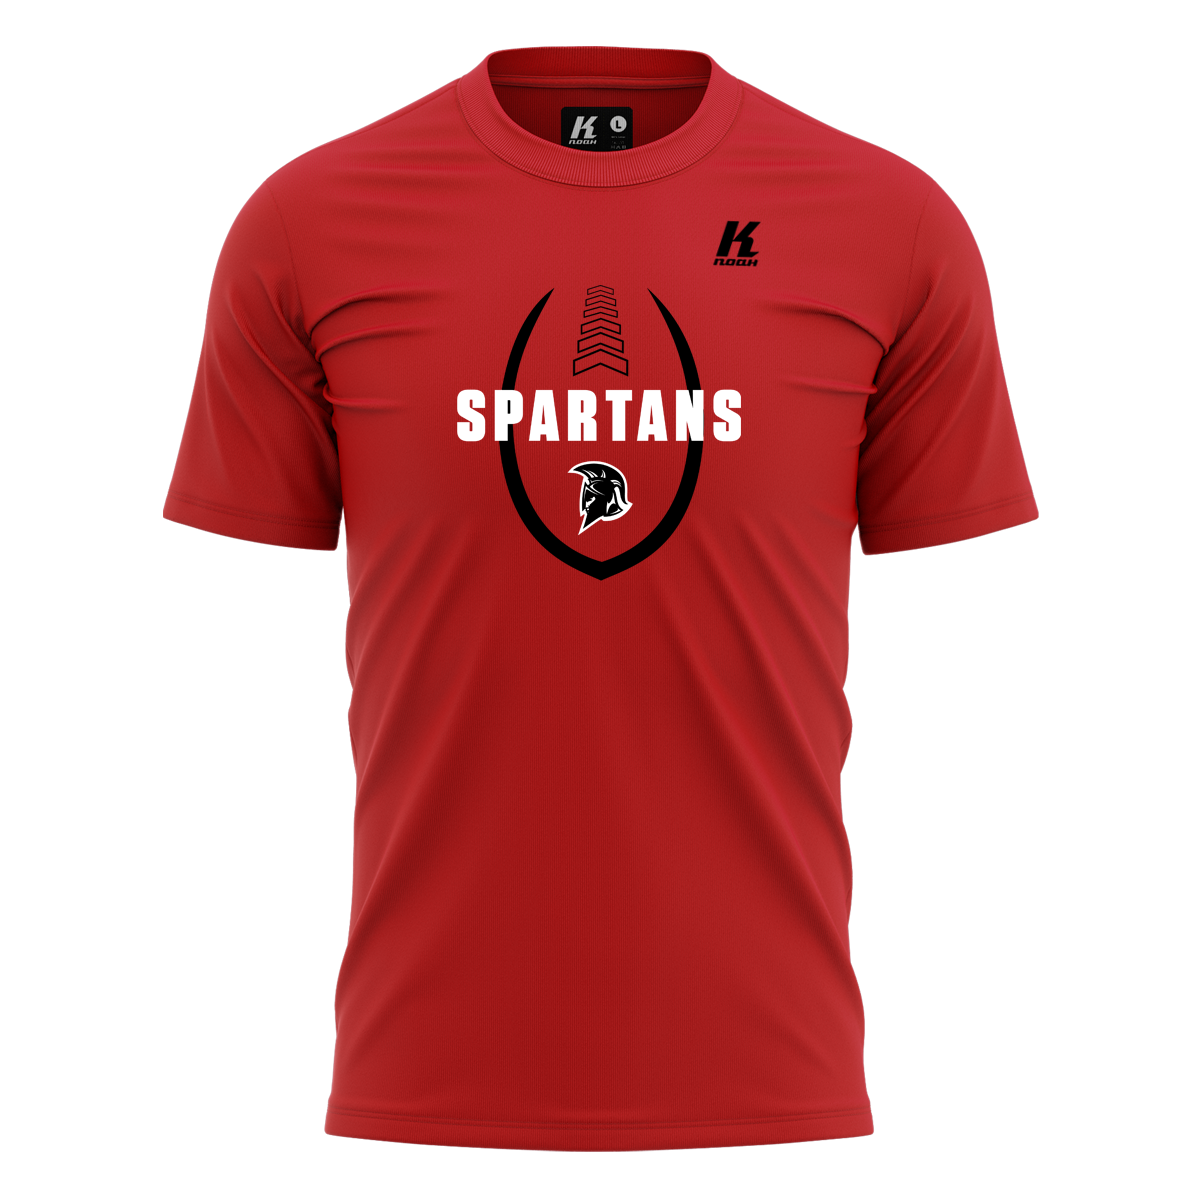 Spartans Fan Tee "Ascending" red